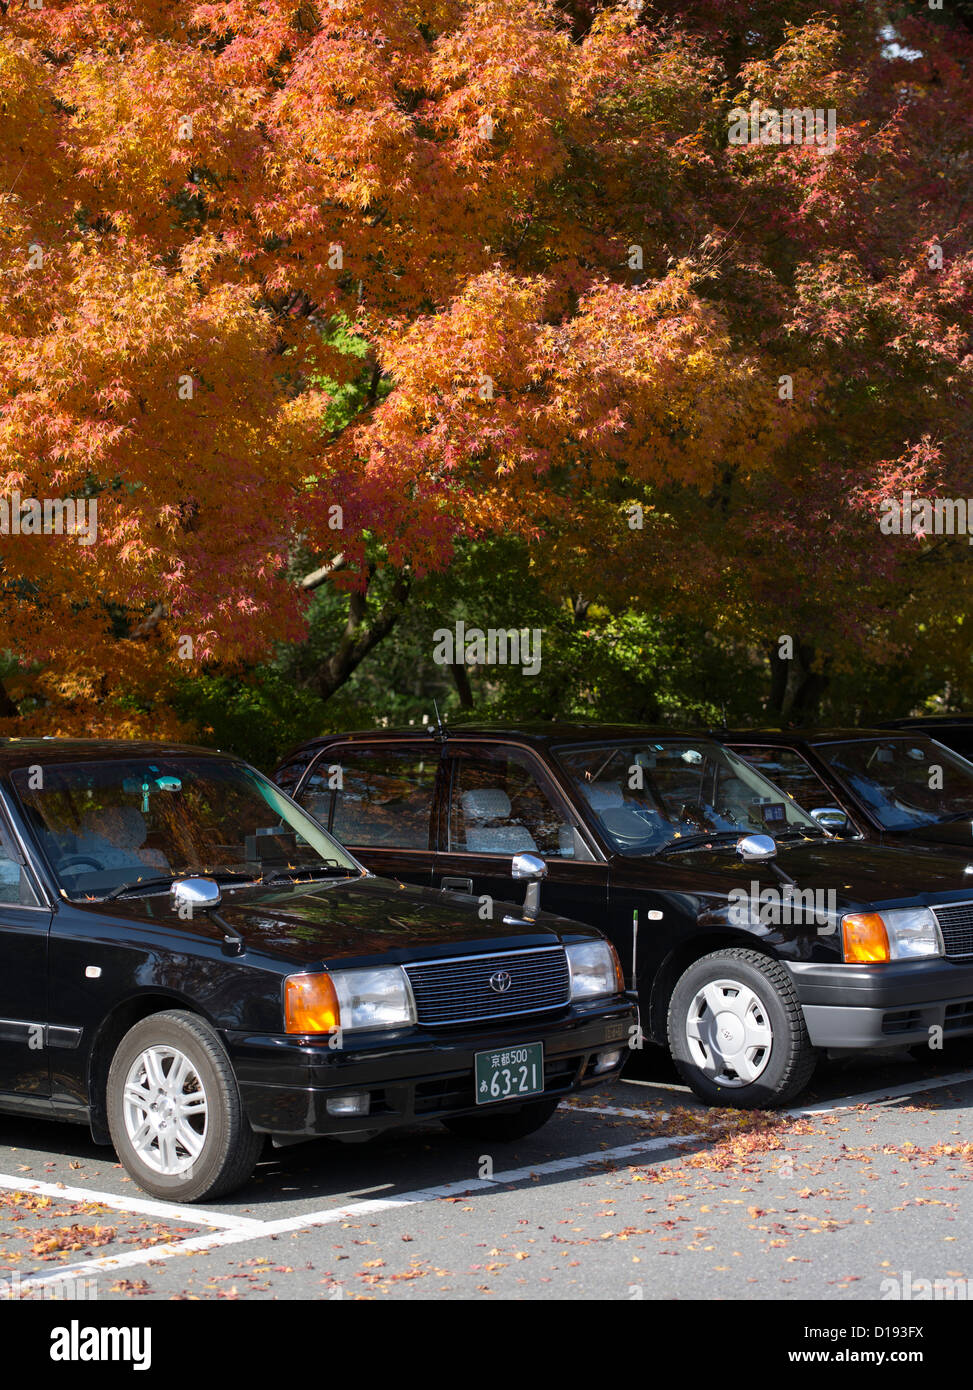 Japanese taxi cabs wait under the autumn / fall leaves / foliage outside Ryōan-ji Zen Buddhist temple in Kyoto Japan. Stock Photo